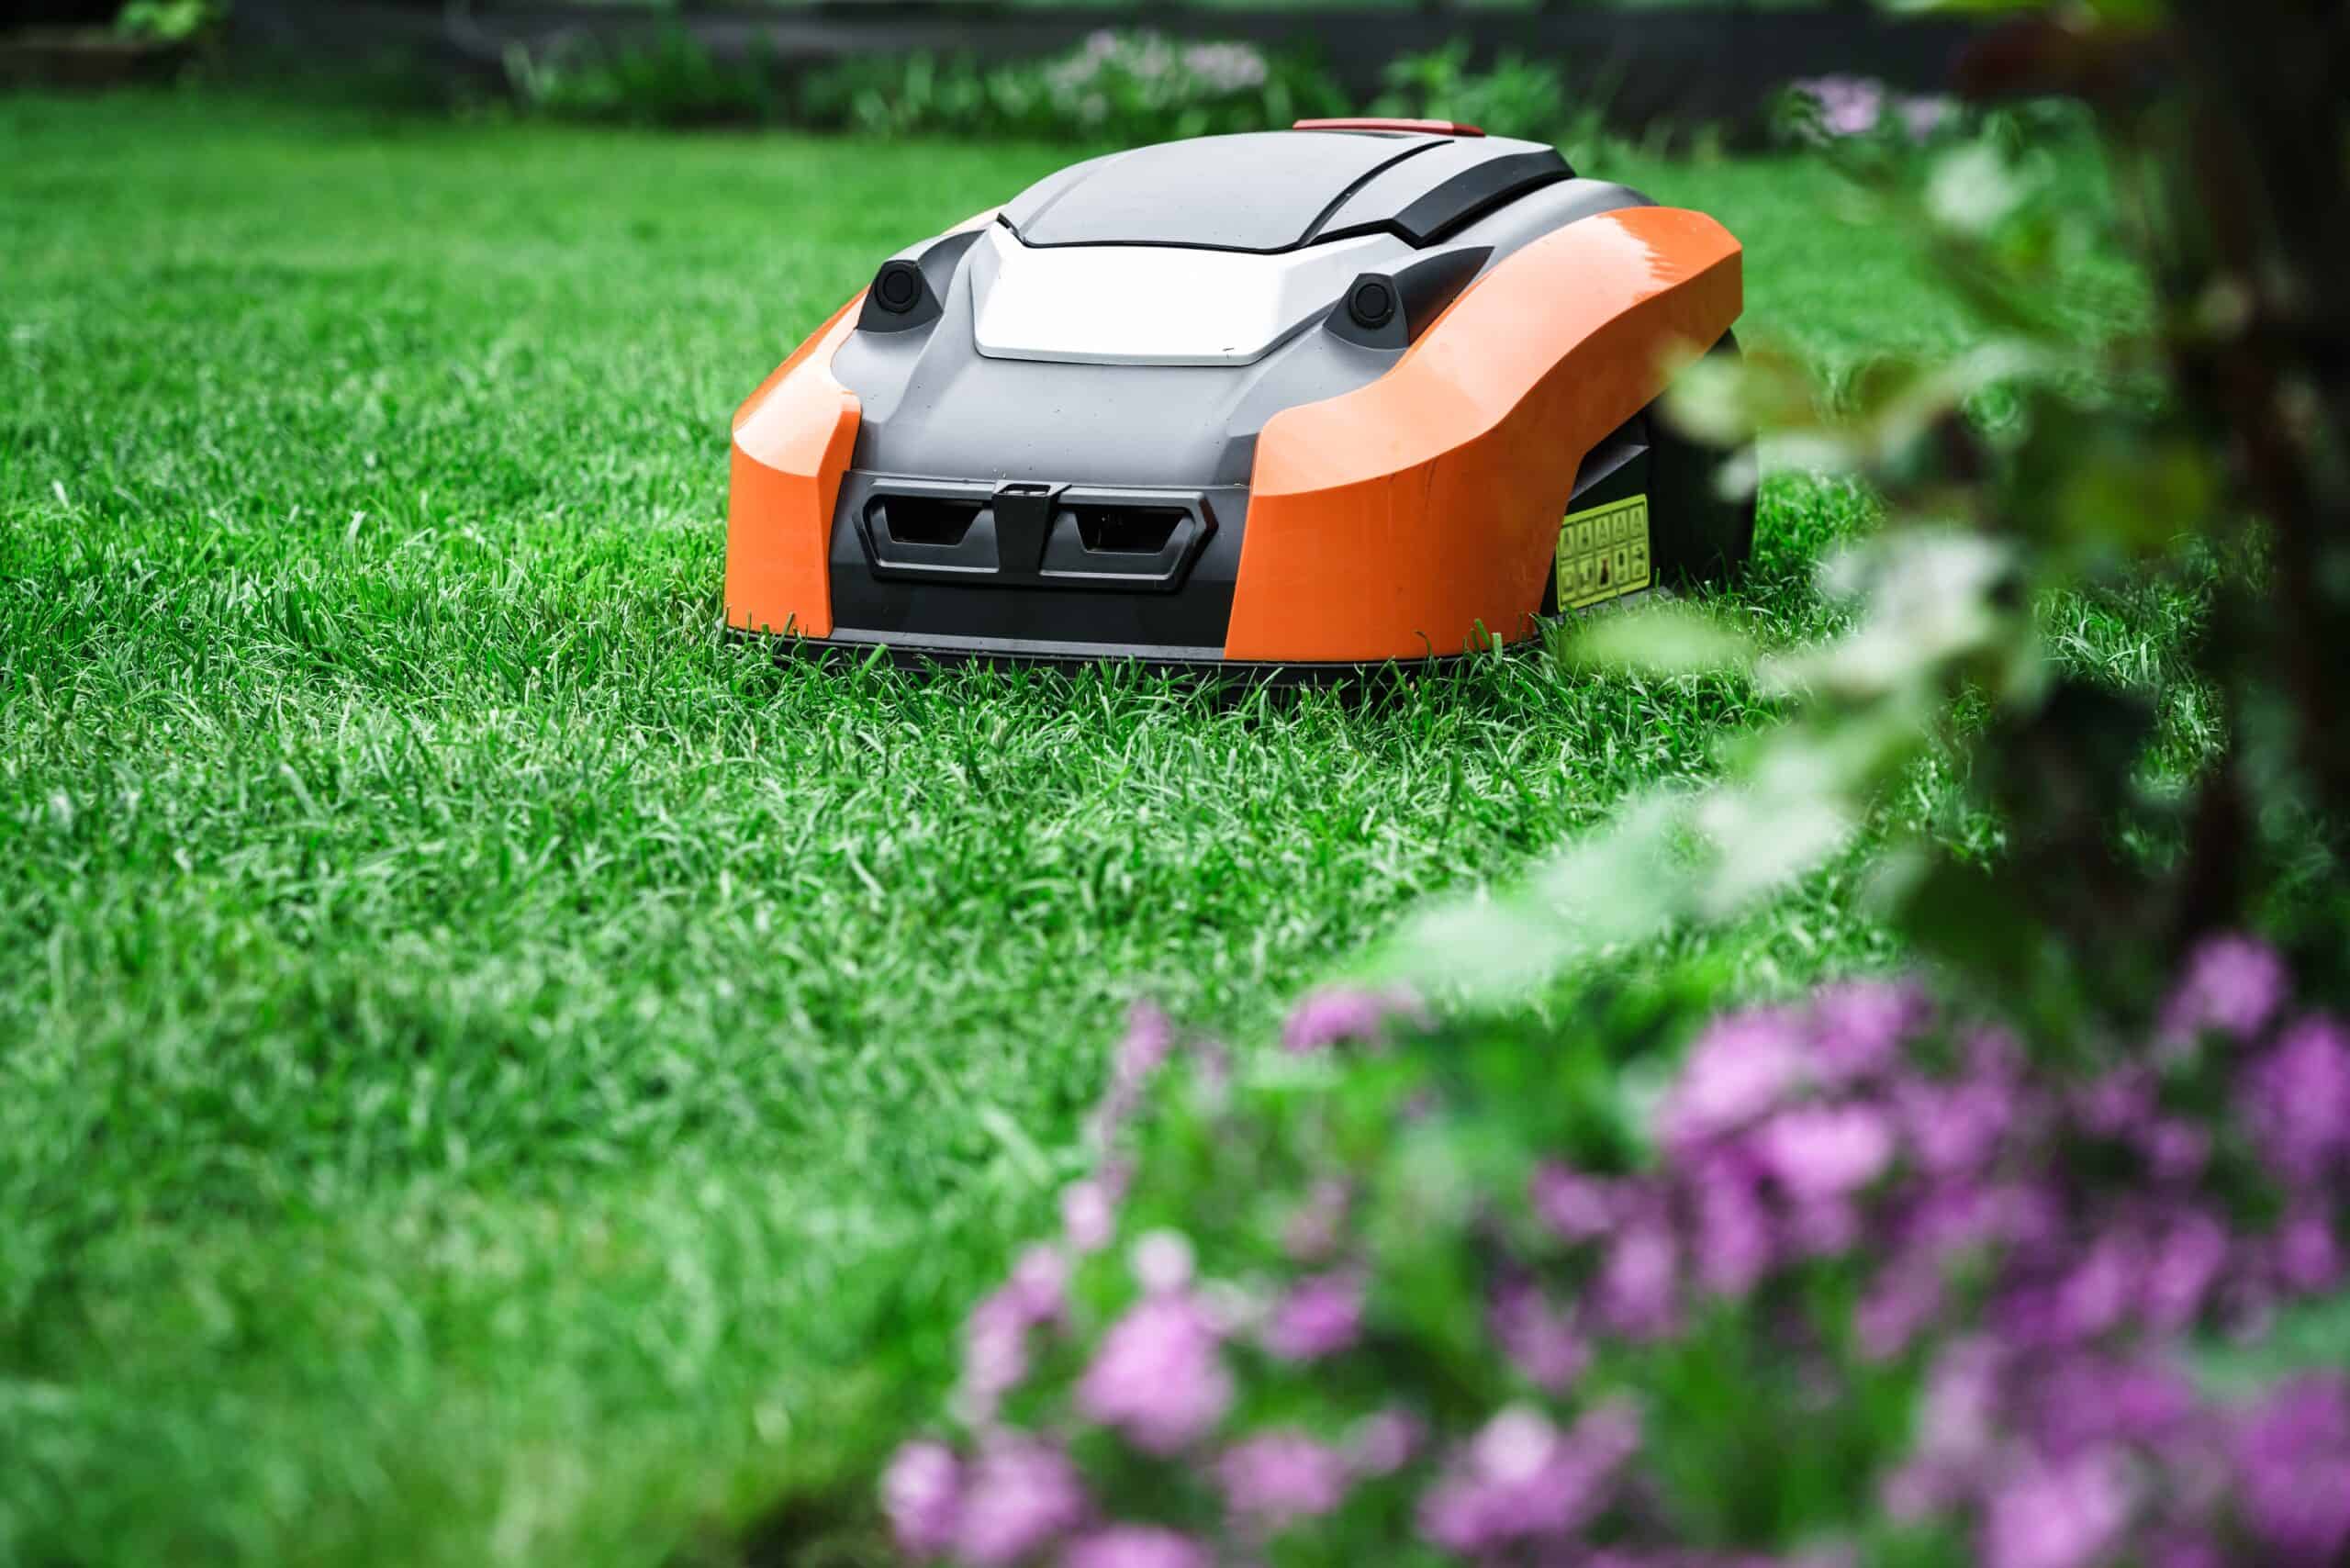 Uredelighed Forekomme Manifold Bosch Robotic Lawnmower vs Husqvarna Robotic Mower: Which One Wins? -  History-Computer